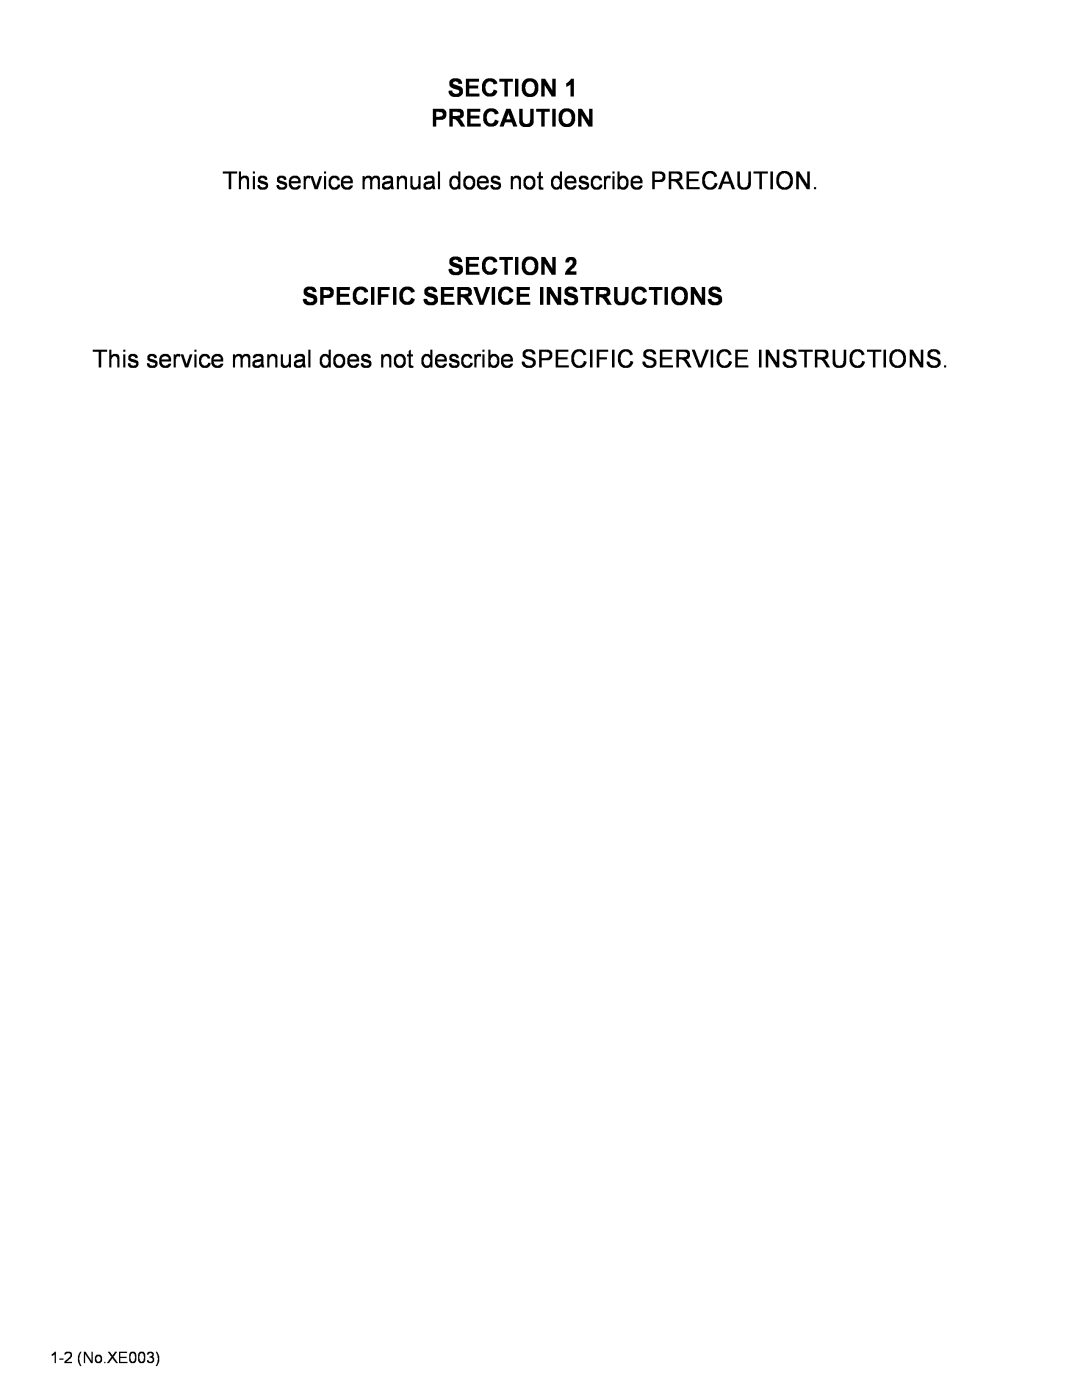 JVC MP-XV841US Section Precaution, This service manual does not describe PRECAUTION, Section Specific Service Instructions 